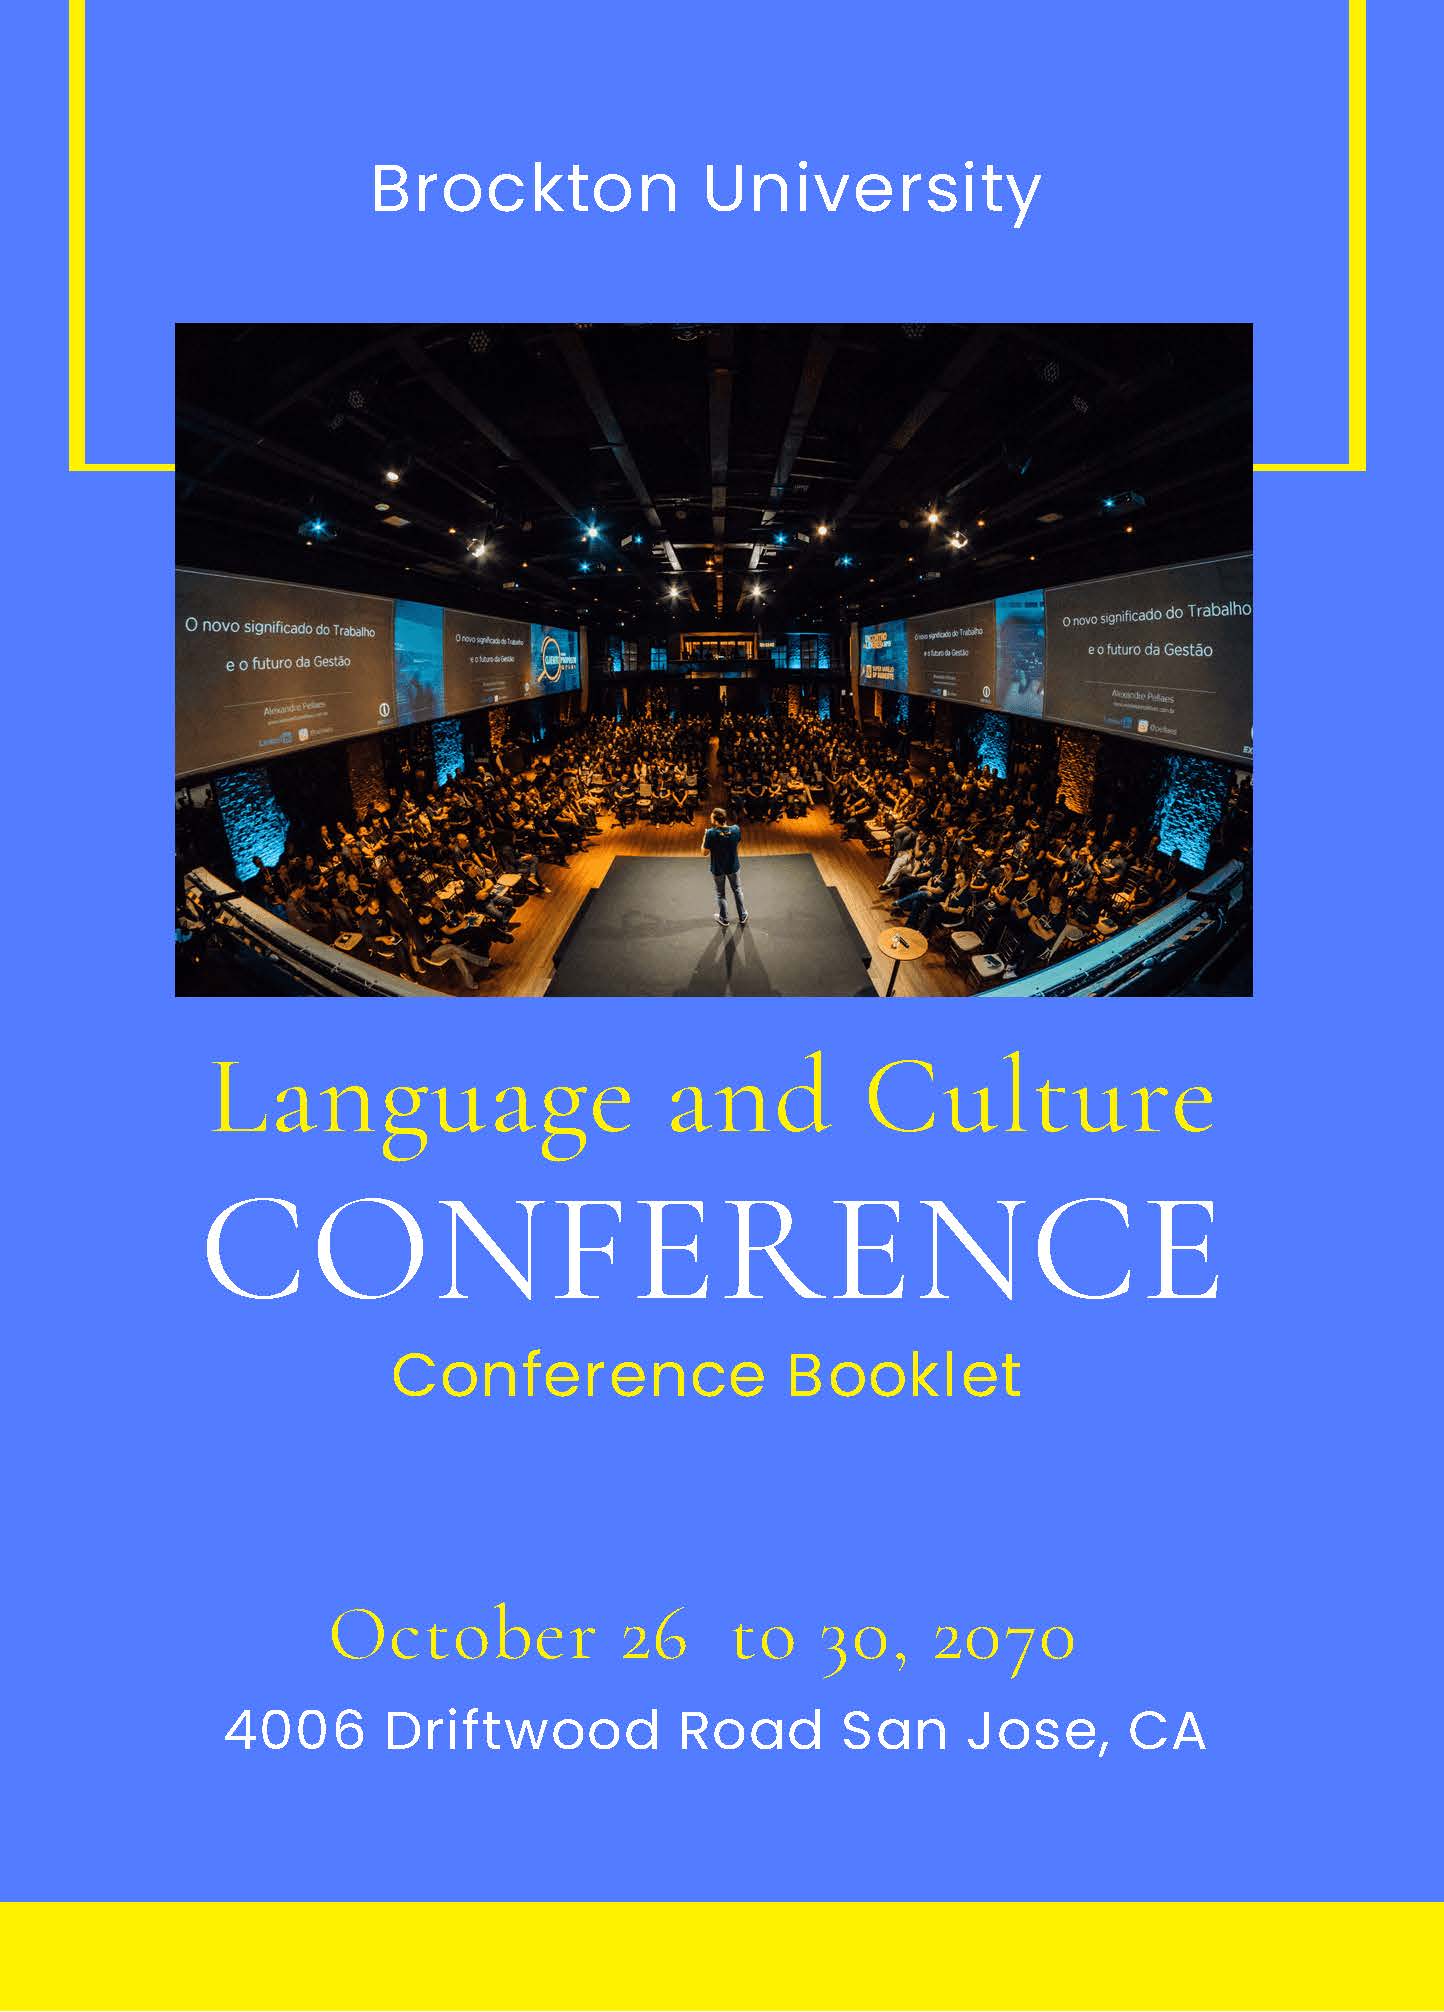 Free Conference Booklet Template in Word, Google Docs, Illustrator, PSD, Apple Pages, Publisher, InDesign